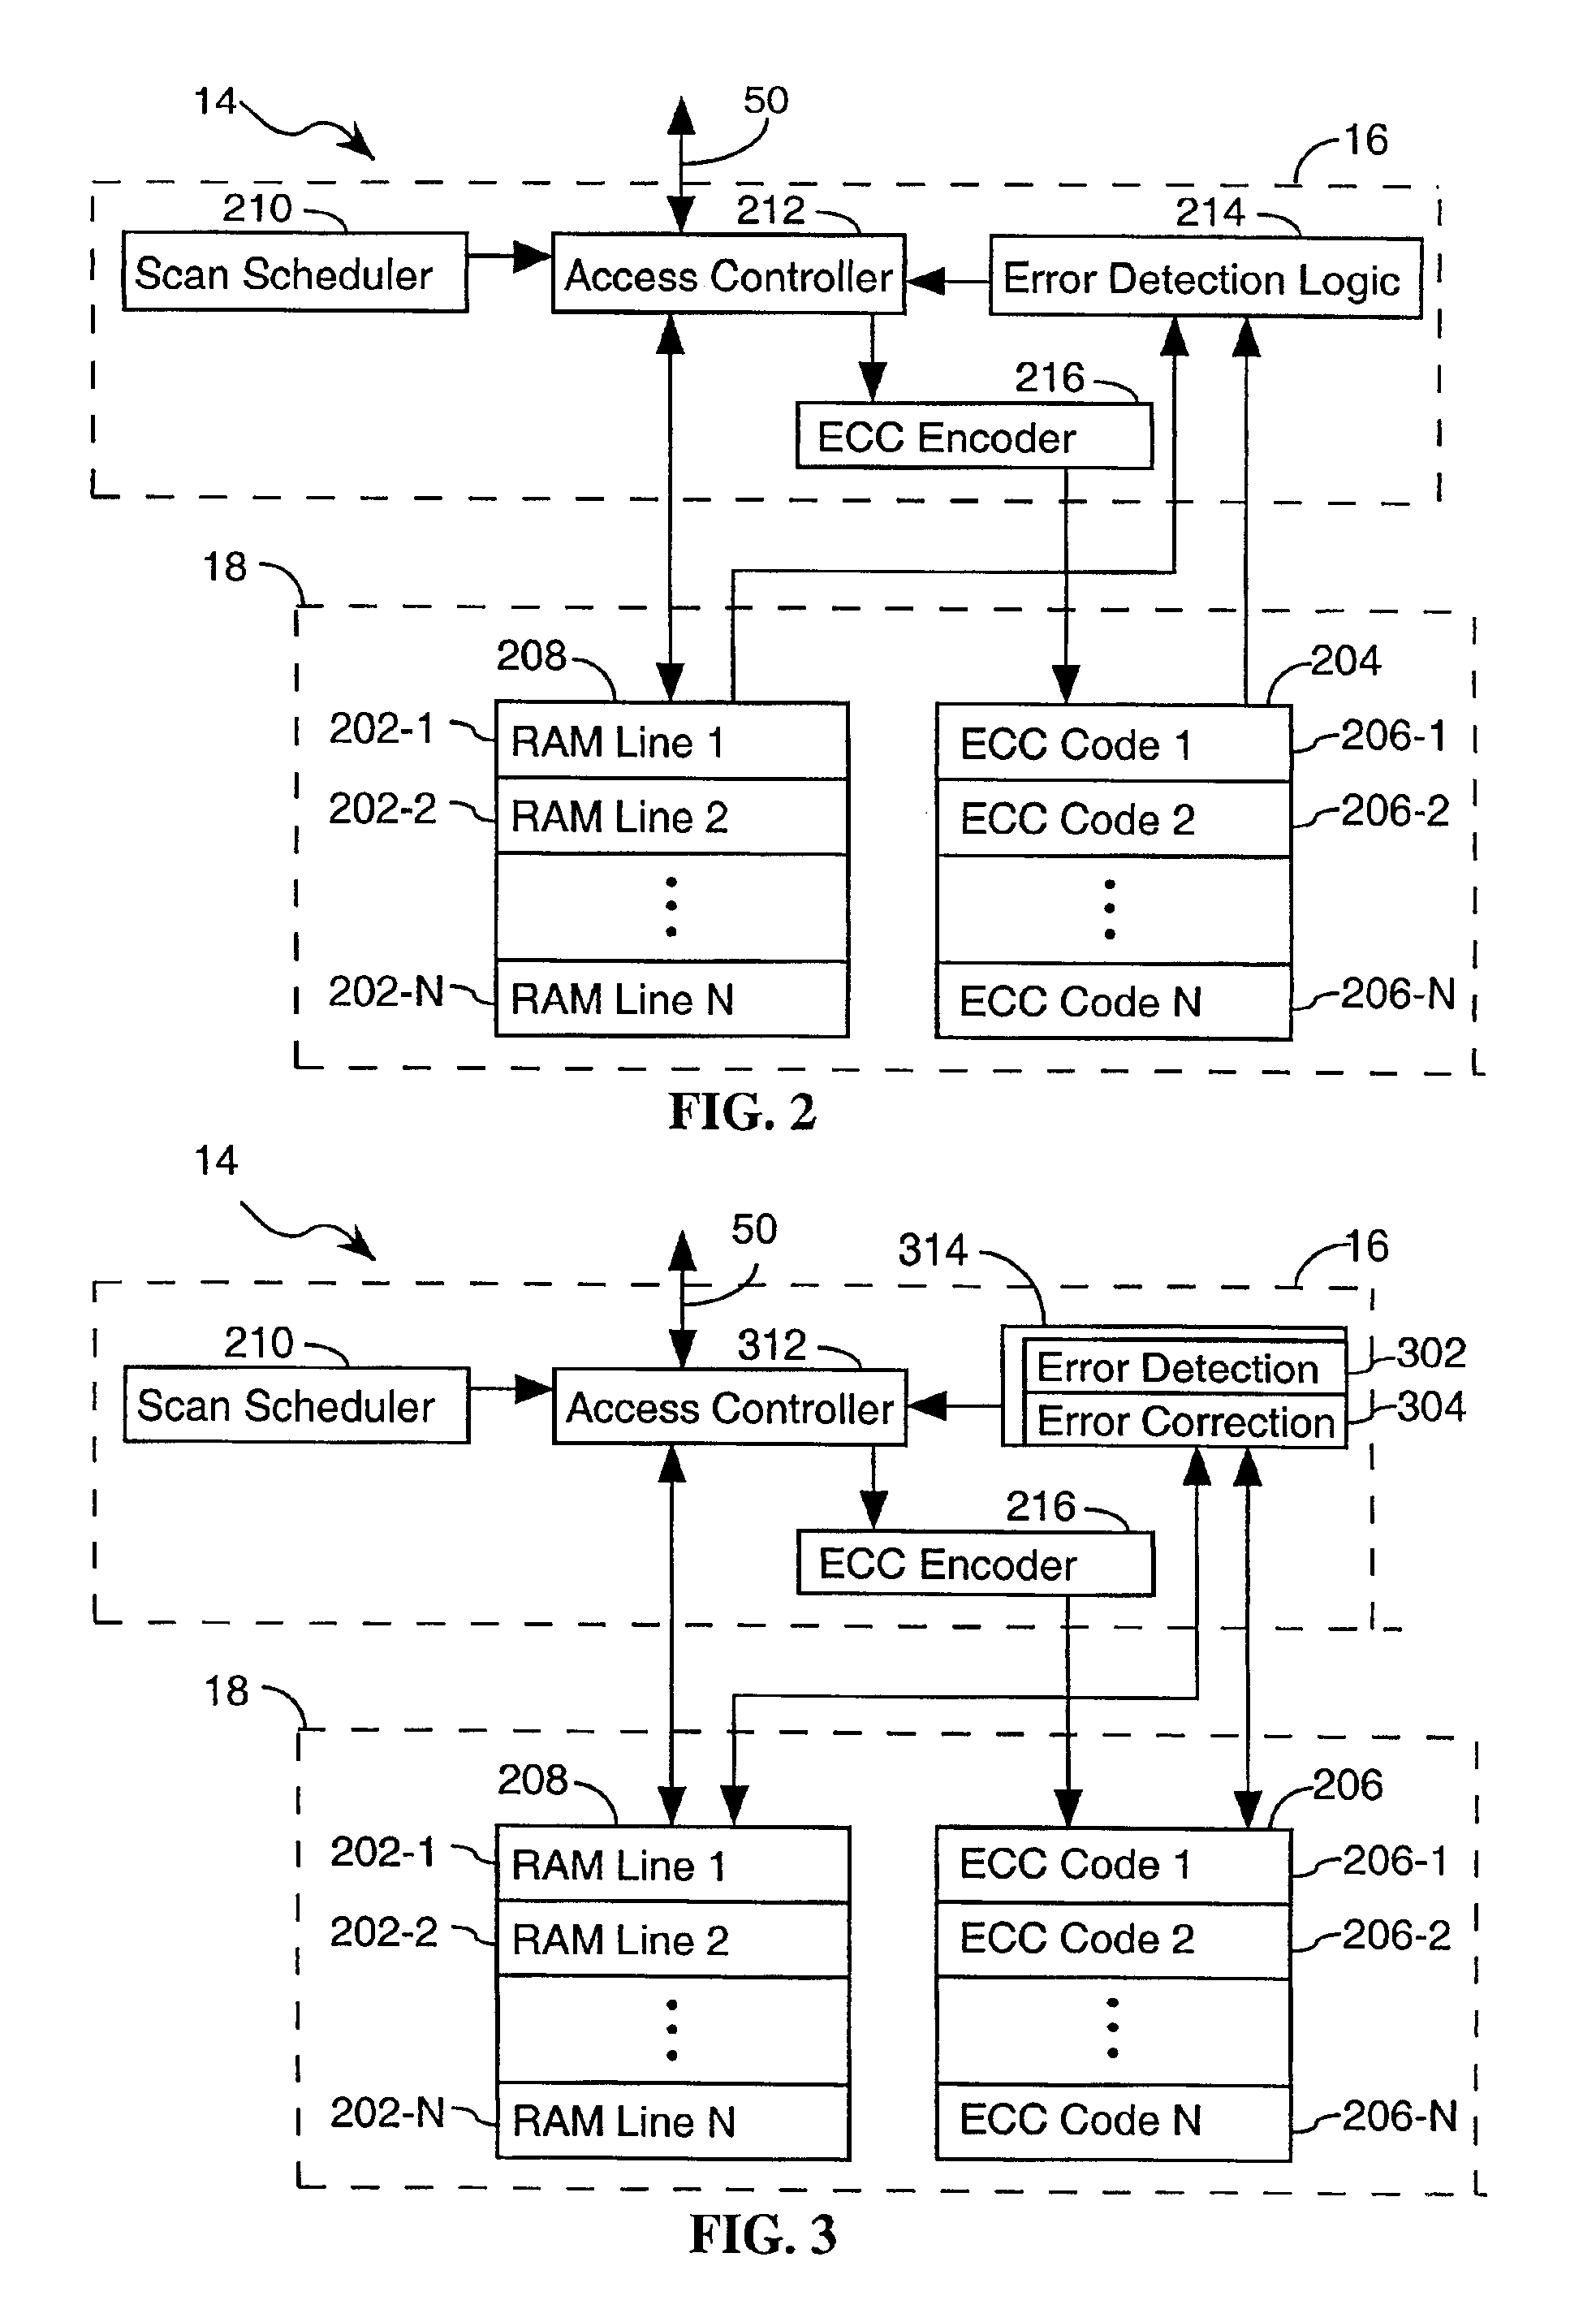 System and method for scrubbing errors in very large memories